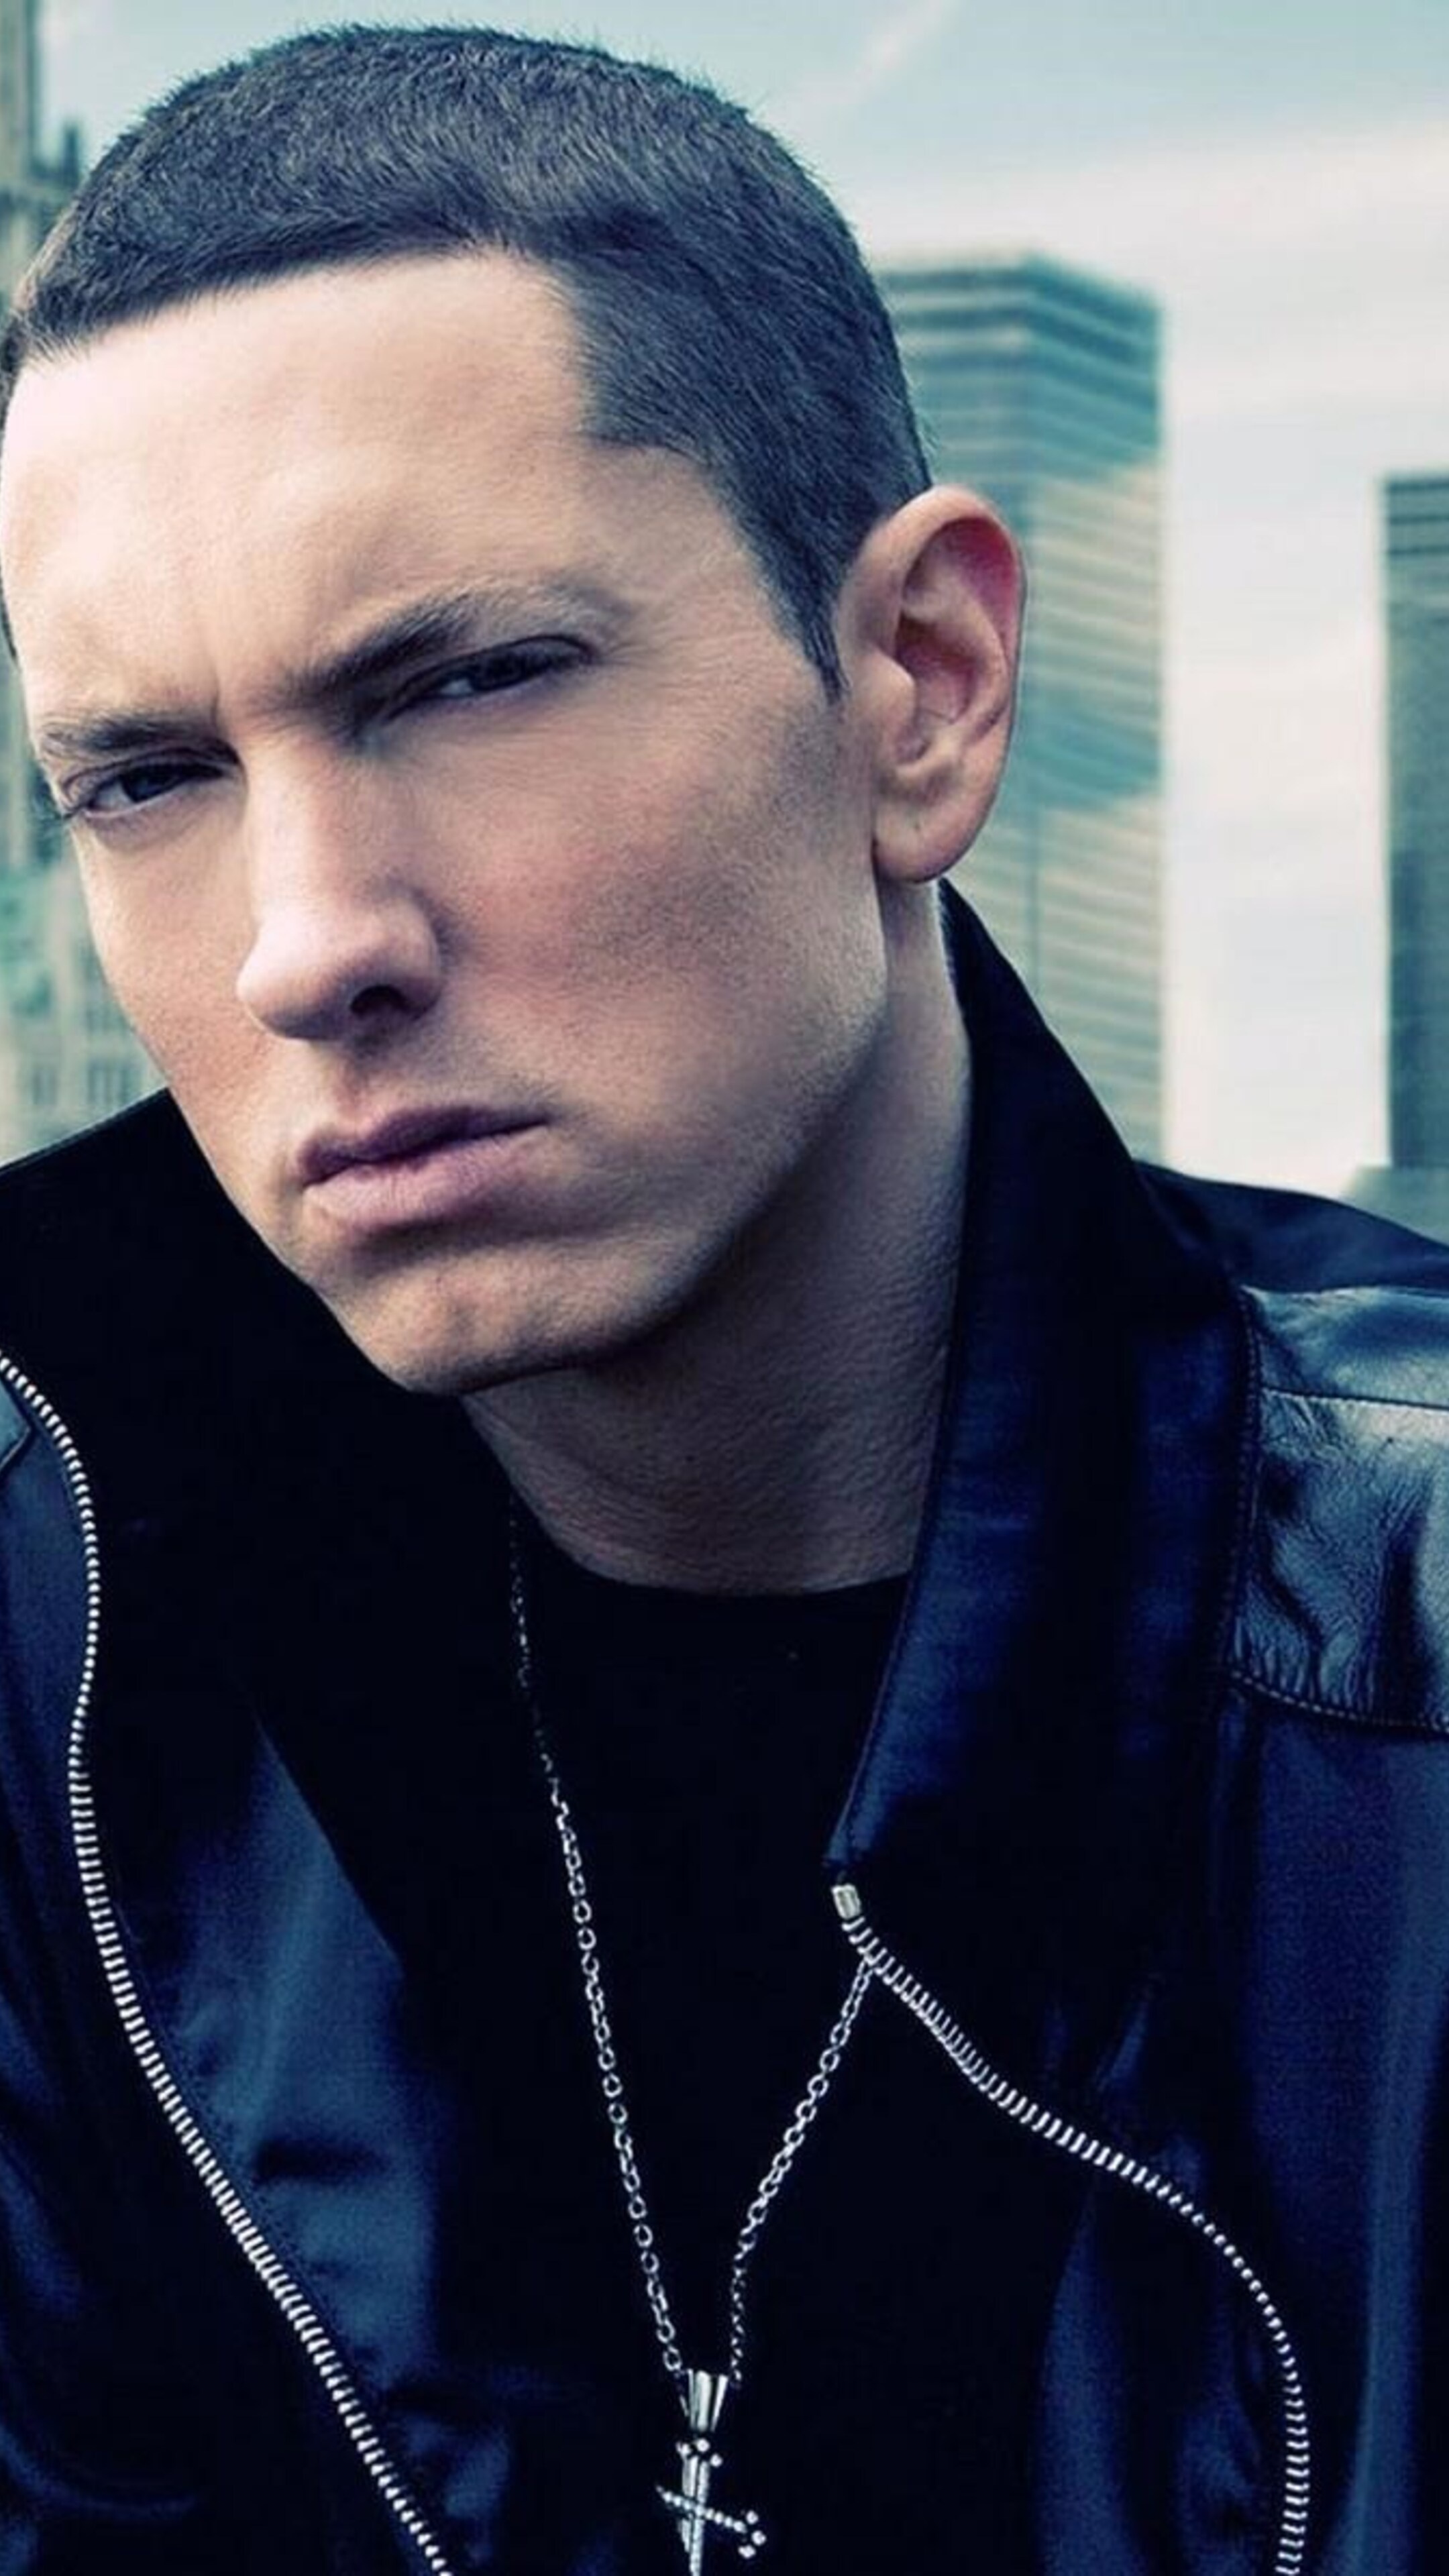 Eminem: Made cameo appearances in the films The Wash, Funny People, and The Interview, and the television series Entourage. 2160x3840 4K Wallpaper.